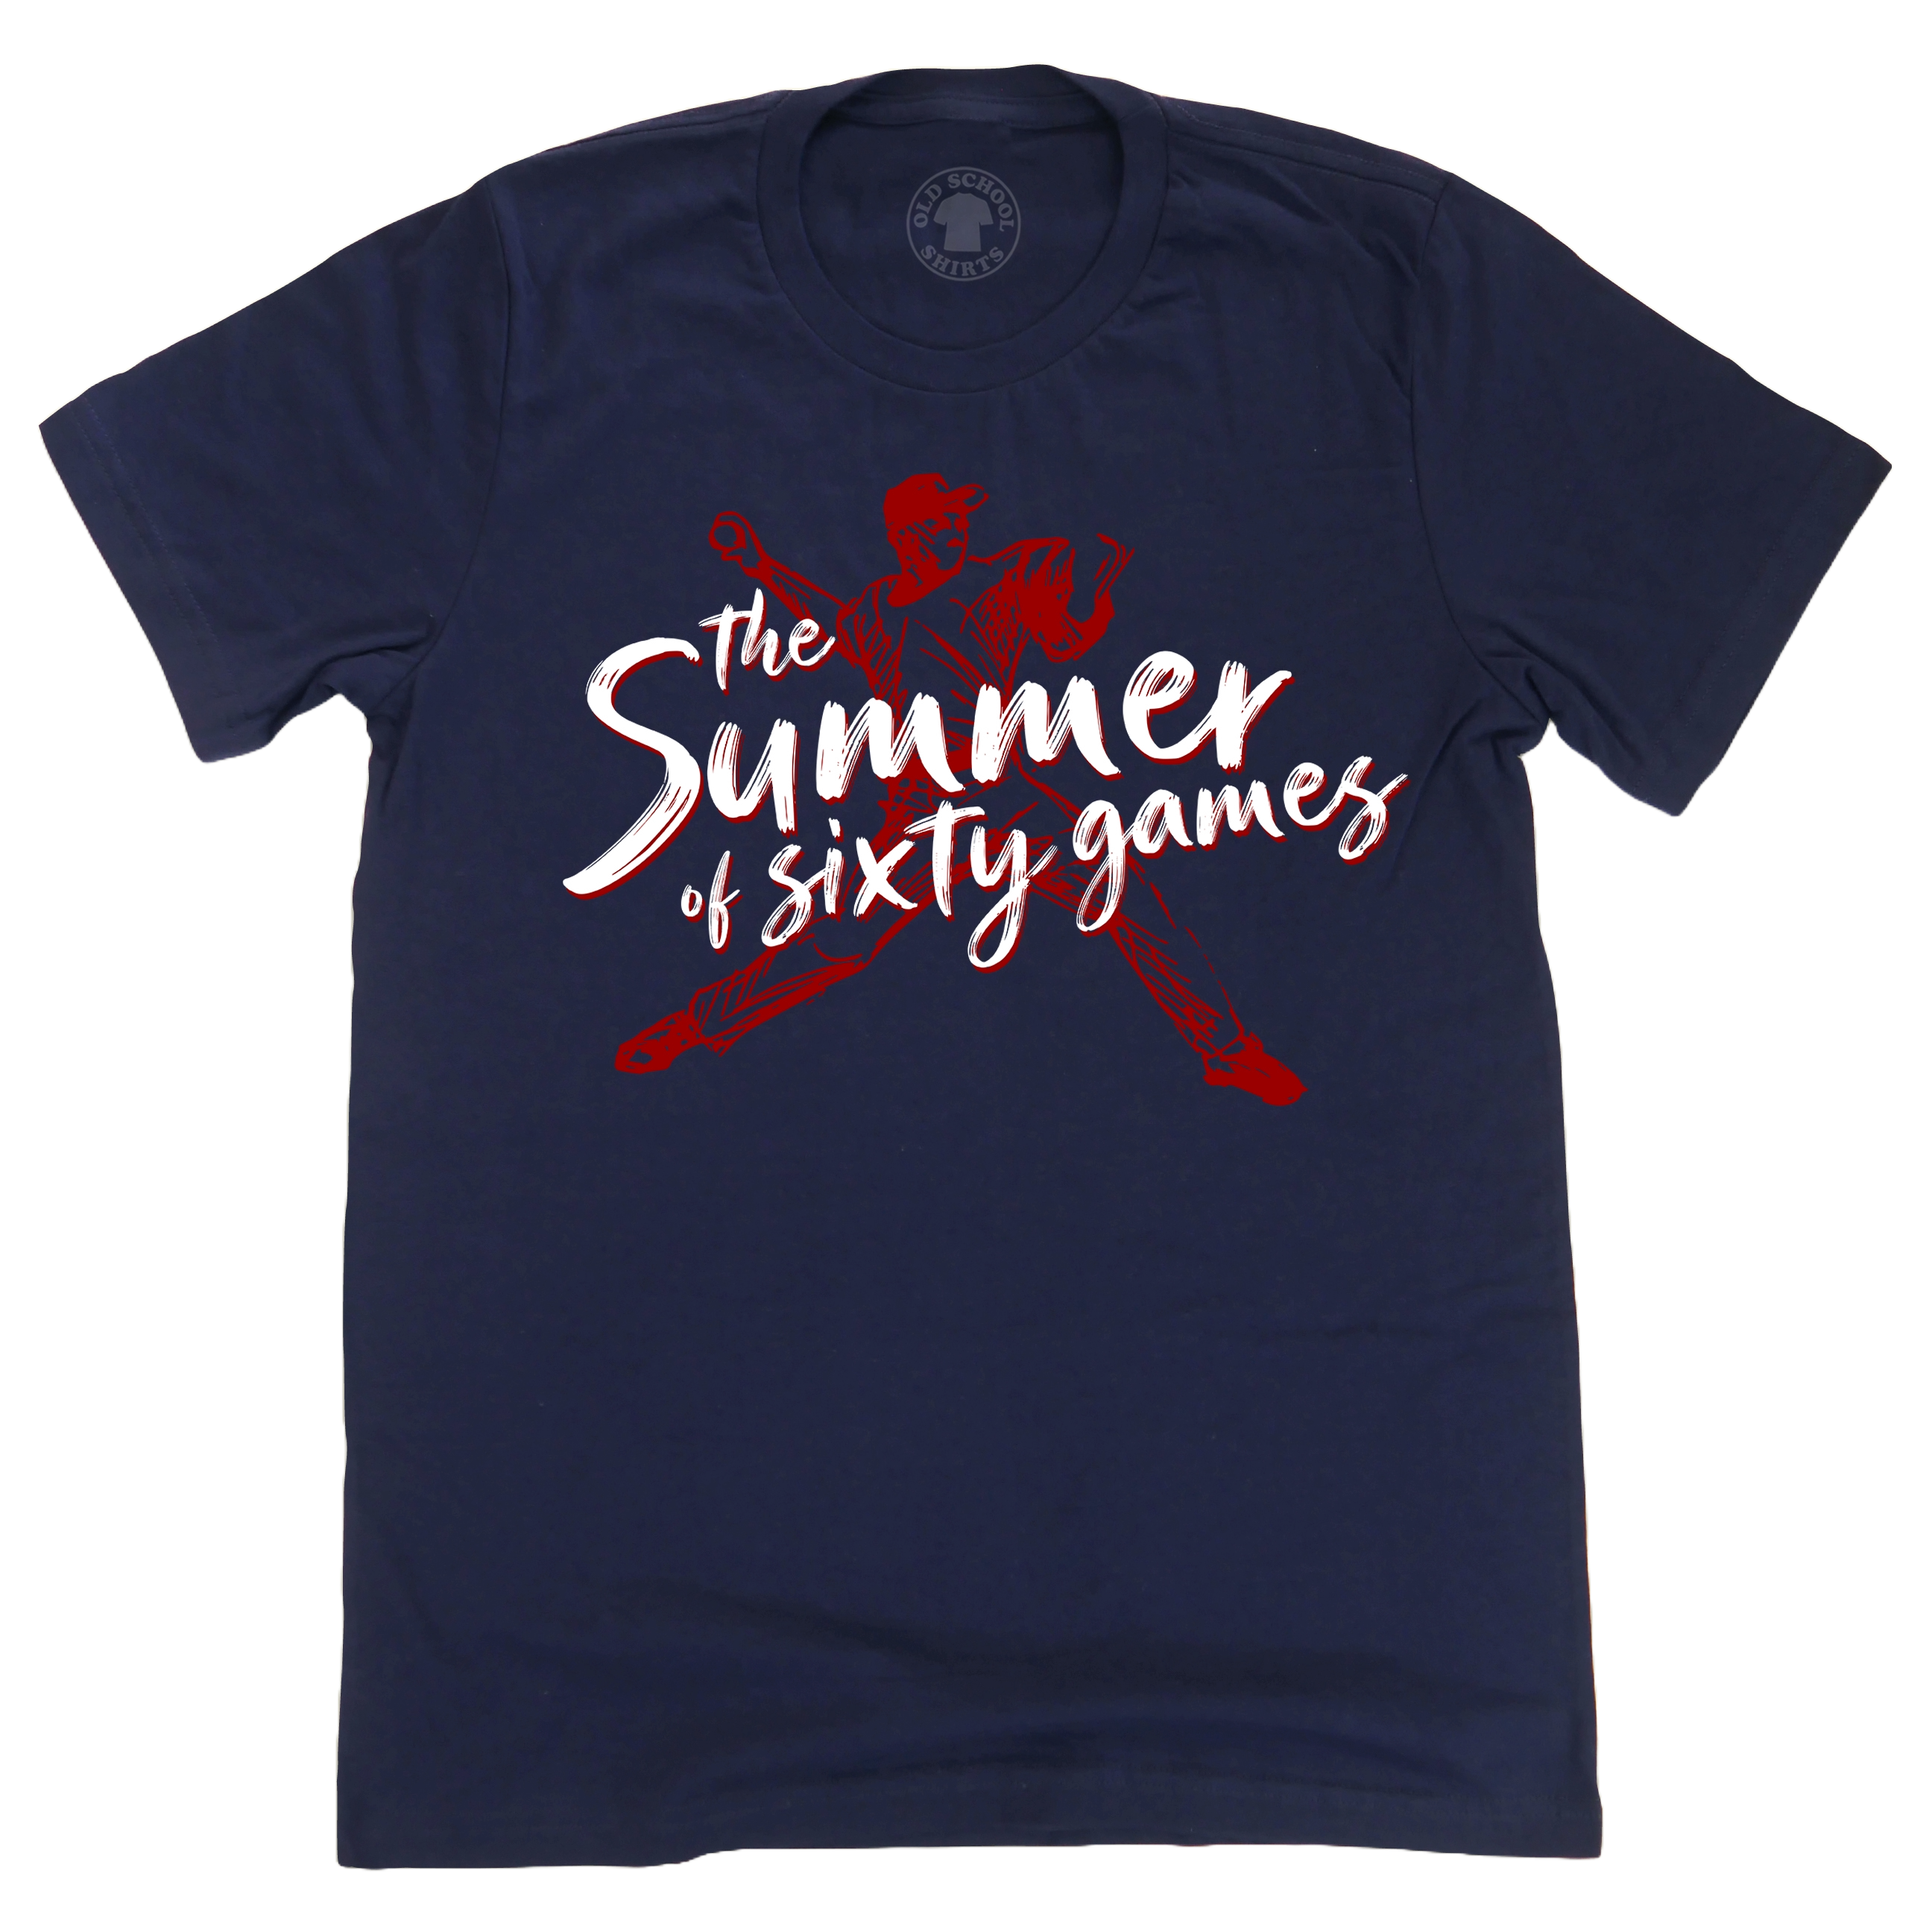 The Summer of Sixty Games - Navy Tee